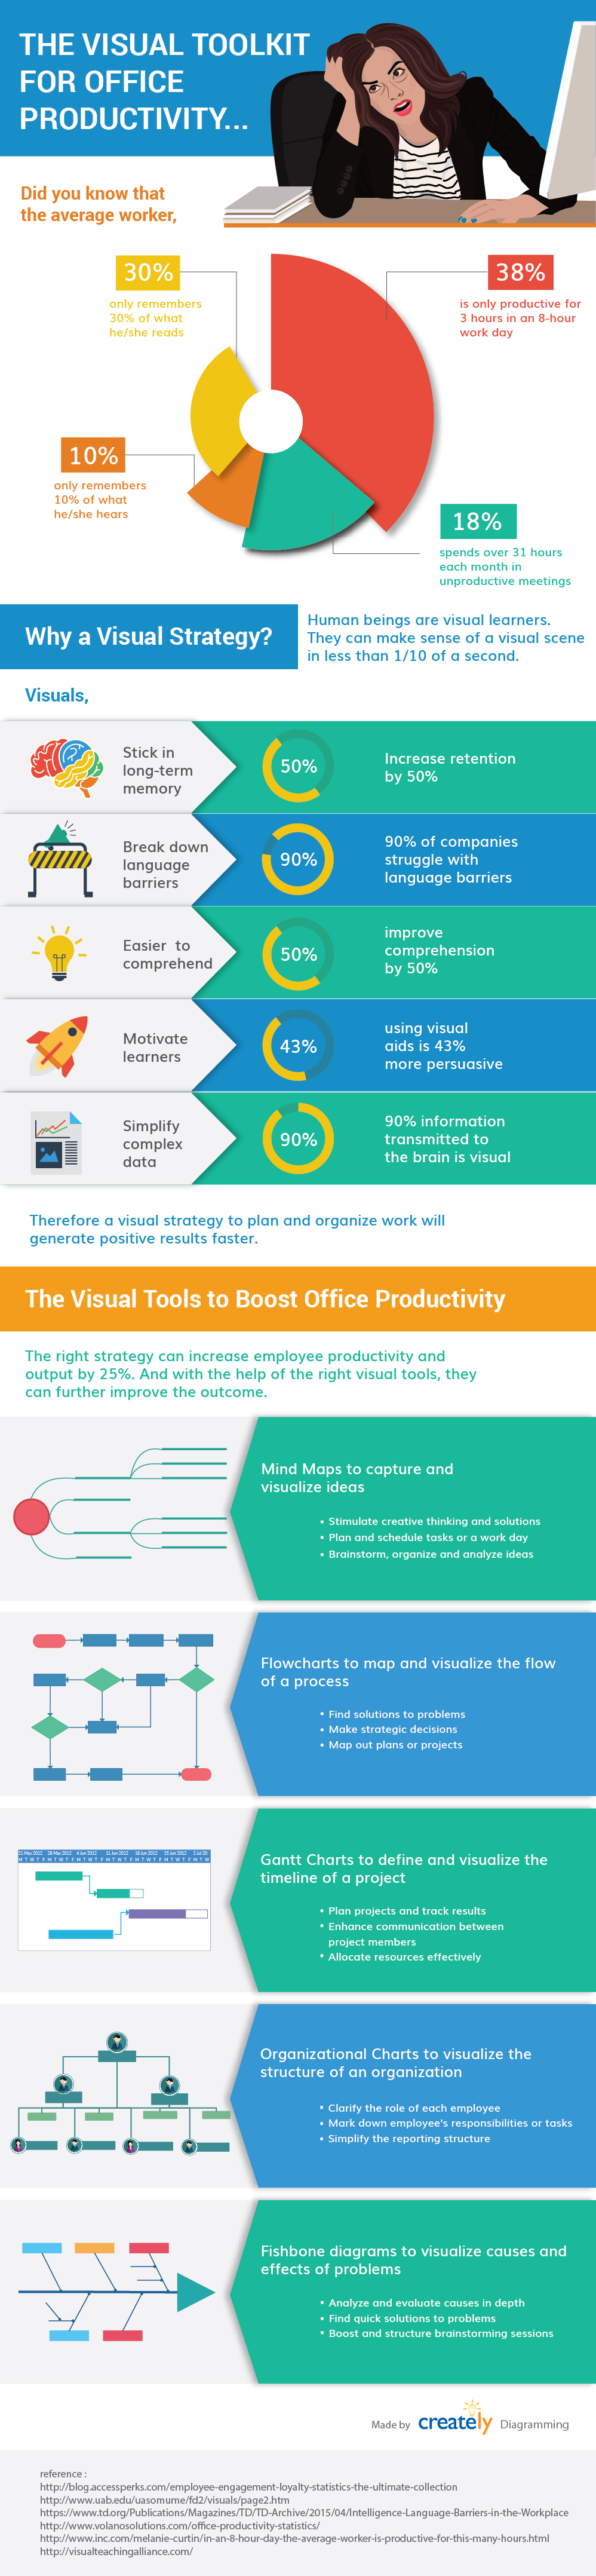 How to Increase Workplace Productivity through Visualization